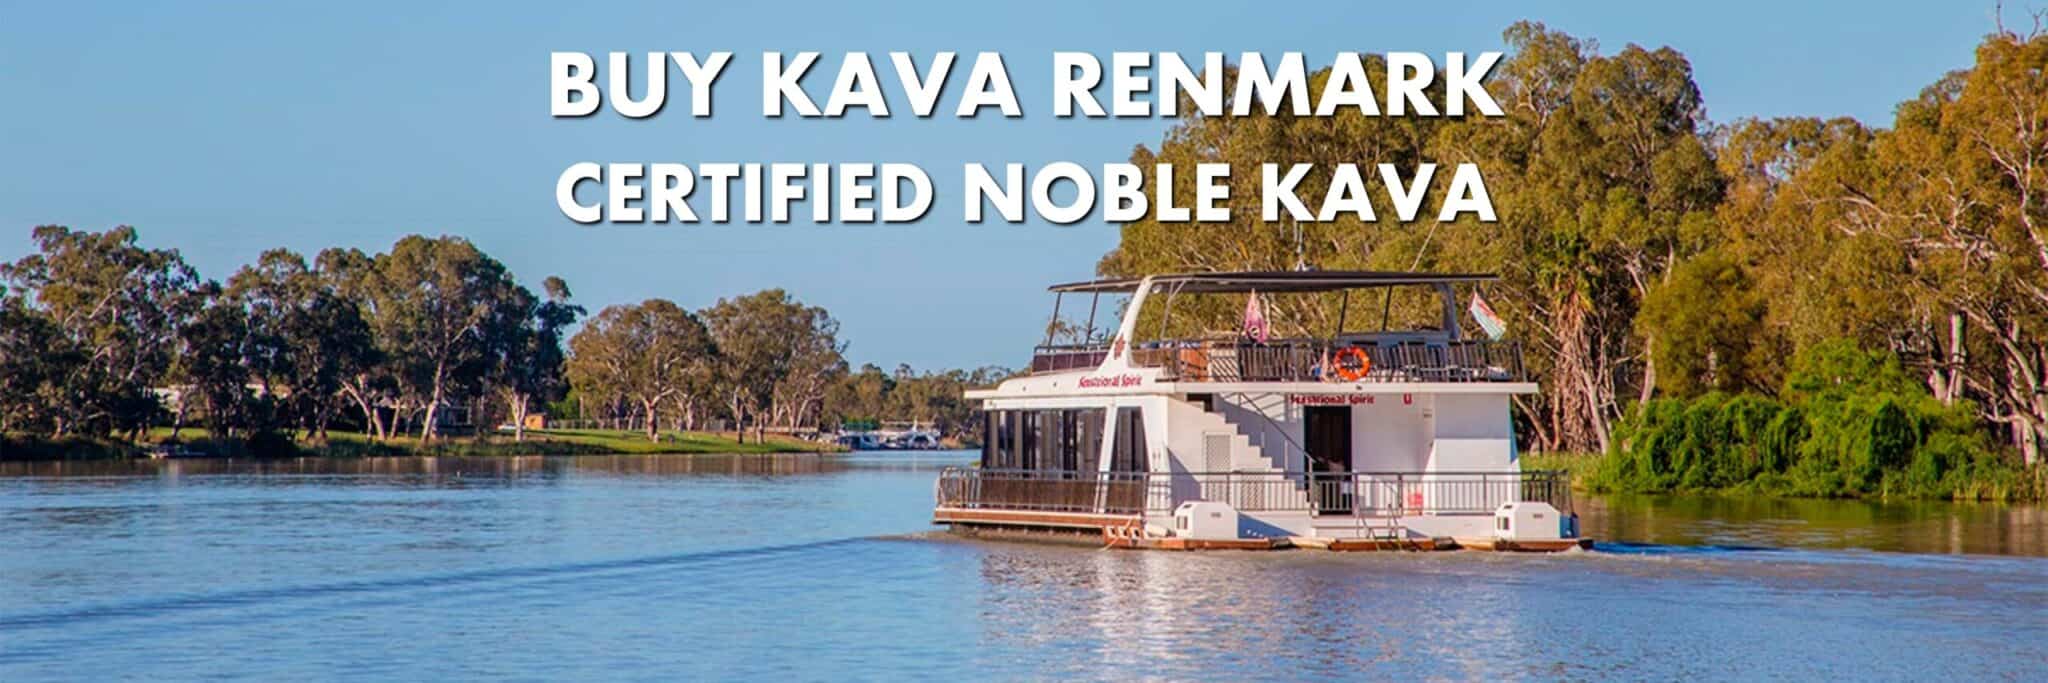 Houseboat on River Murray in Renmark South Australia with caption Buy Kava Renmark Certified Noble Kava